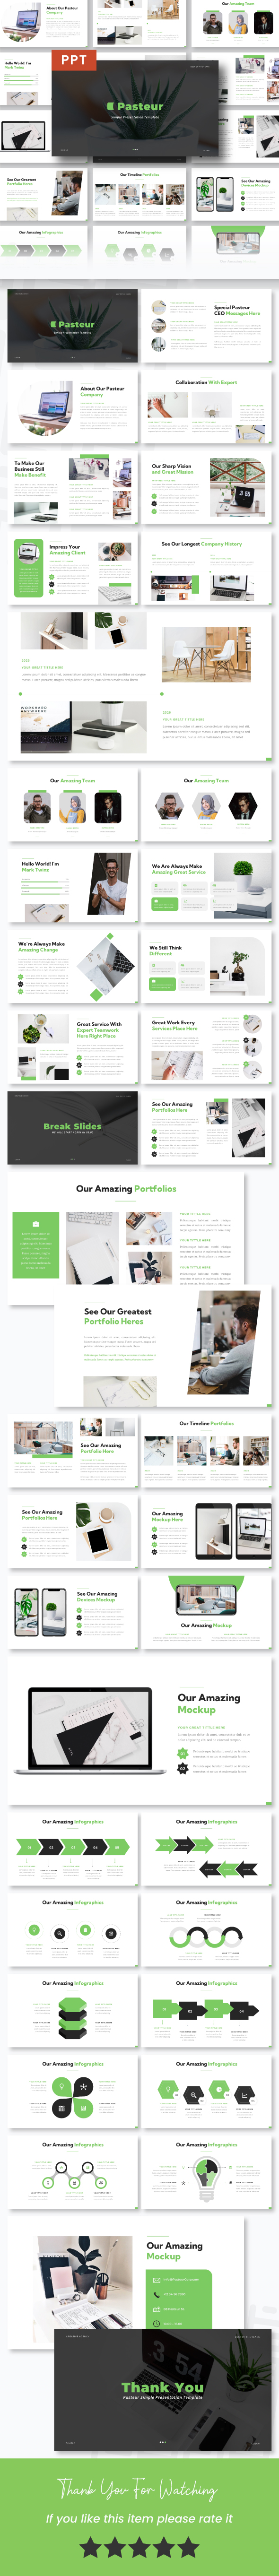 [DOWNLOAD]Pasteur - Business PowerPoint Template